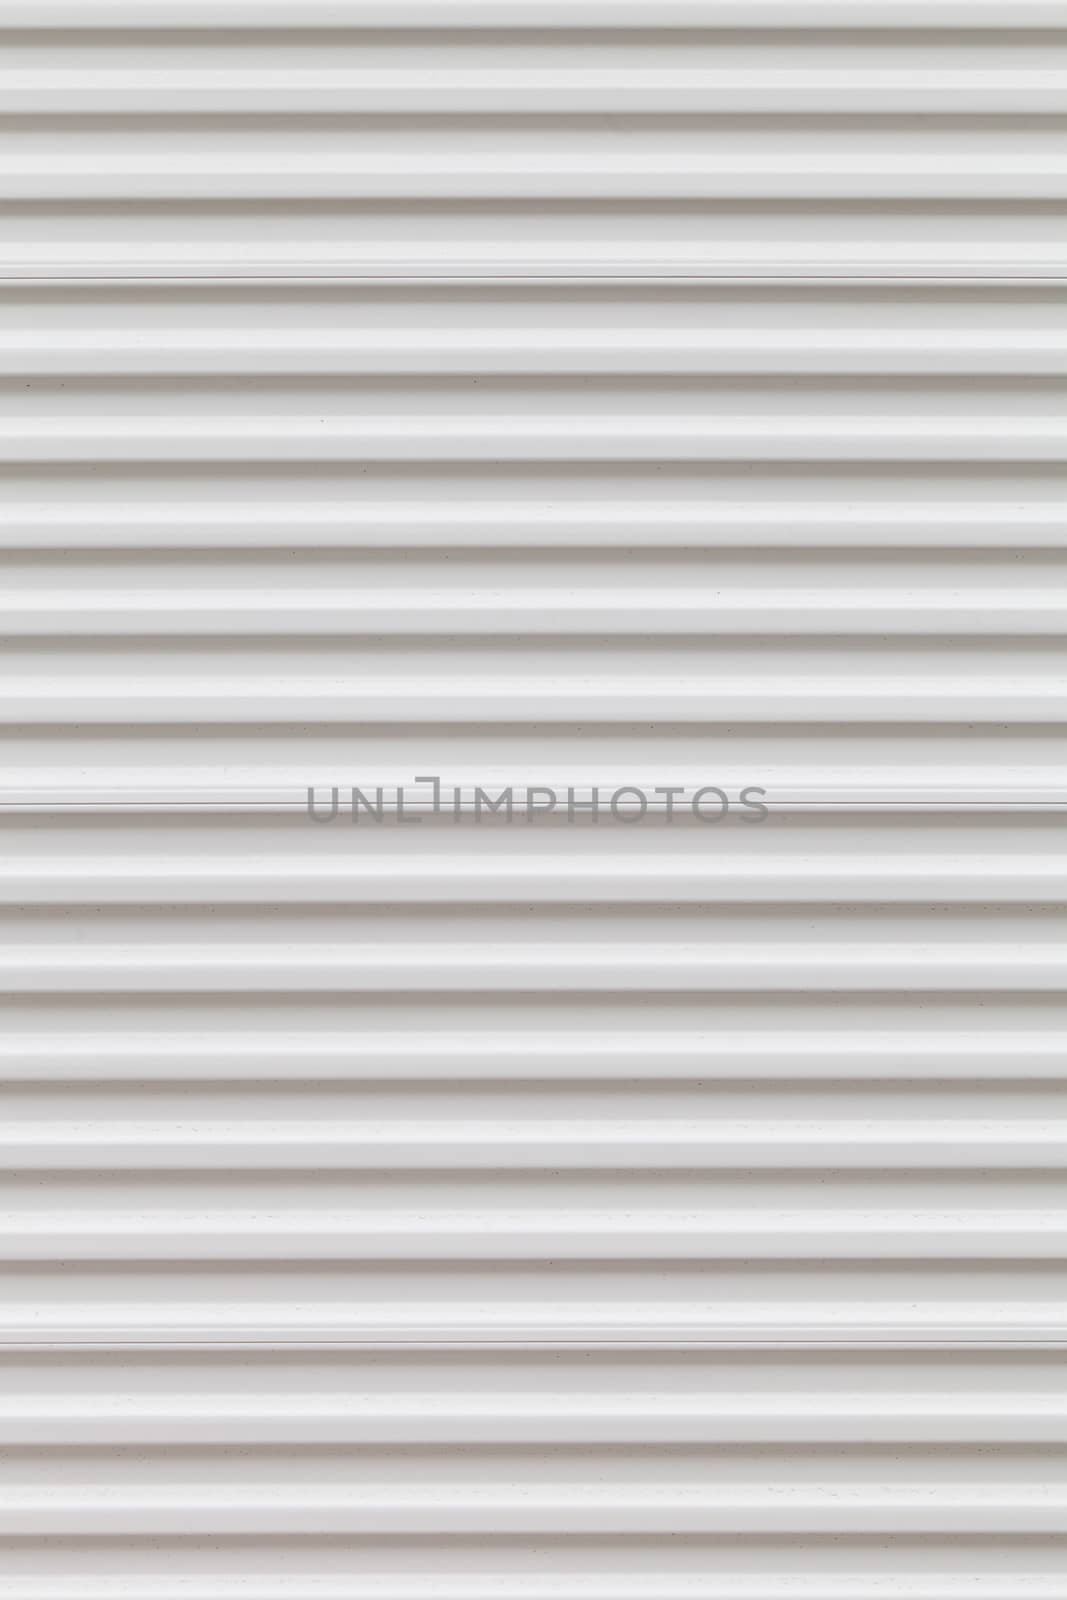 Corrugated Metal Wall by graficallyminded